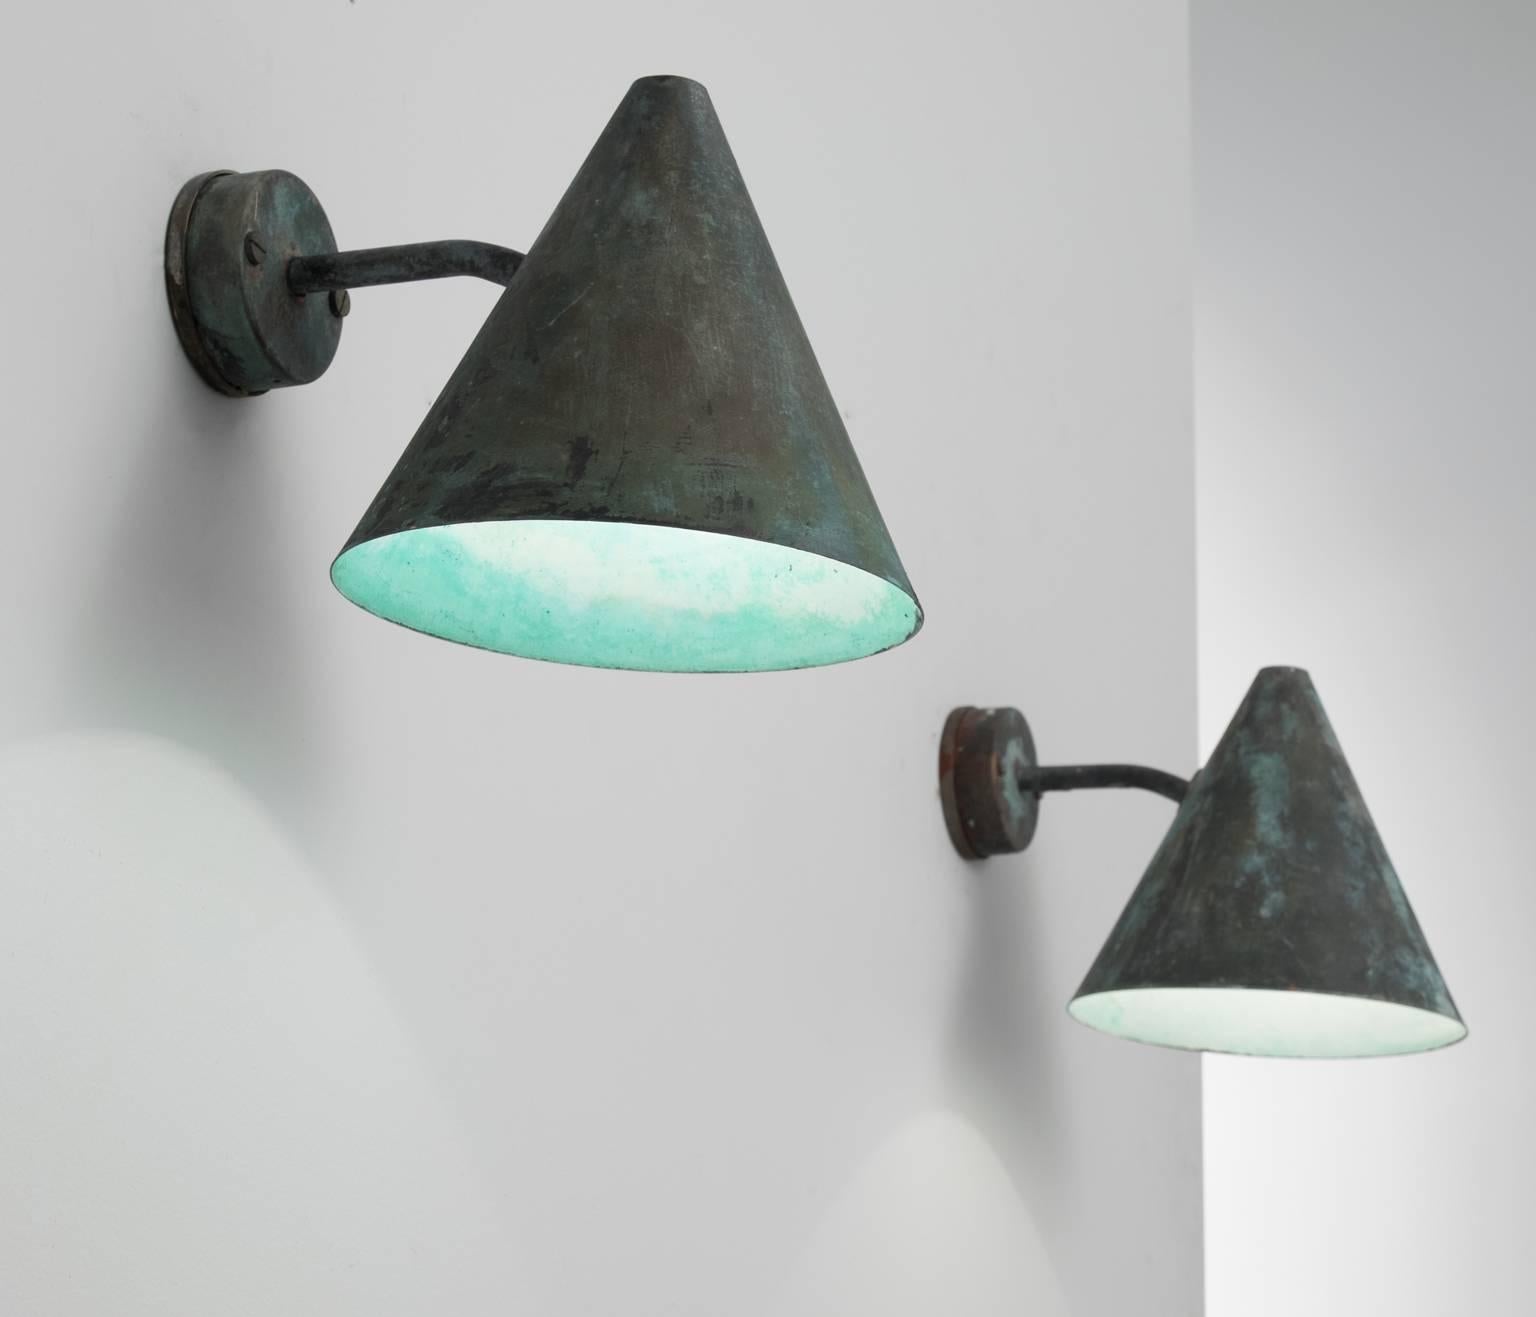 Set of eight wall lights, in copper, by Hans-Agne Jakobsson for AB Markaryd, Sweden, 1950s. 

Set of eight cone-shaped wall lights designed by Hans-Agne Jakobsson for AB Markaryd, in beautifully patinated copper. The light this model shines creates